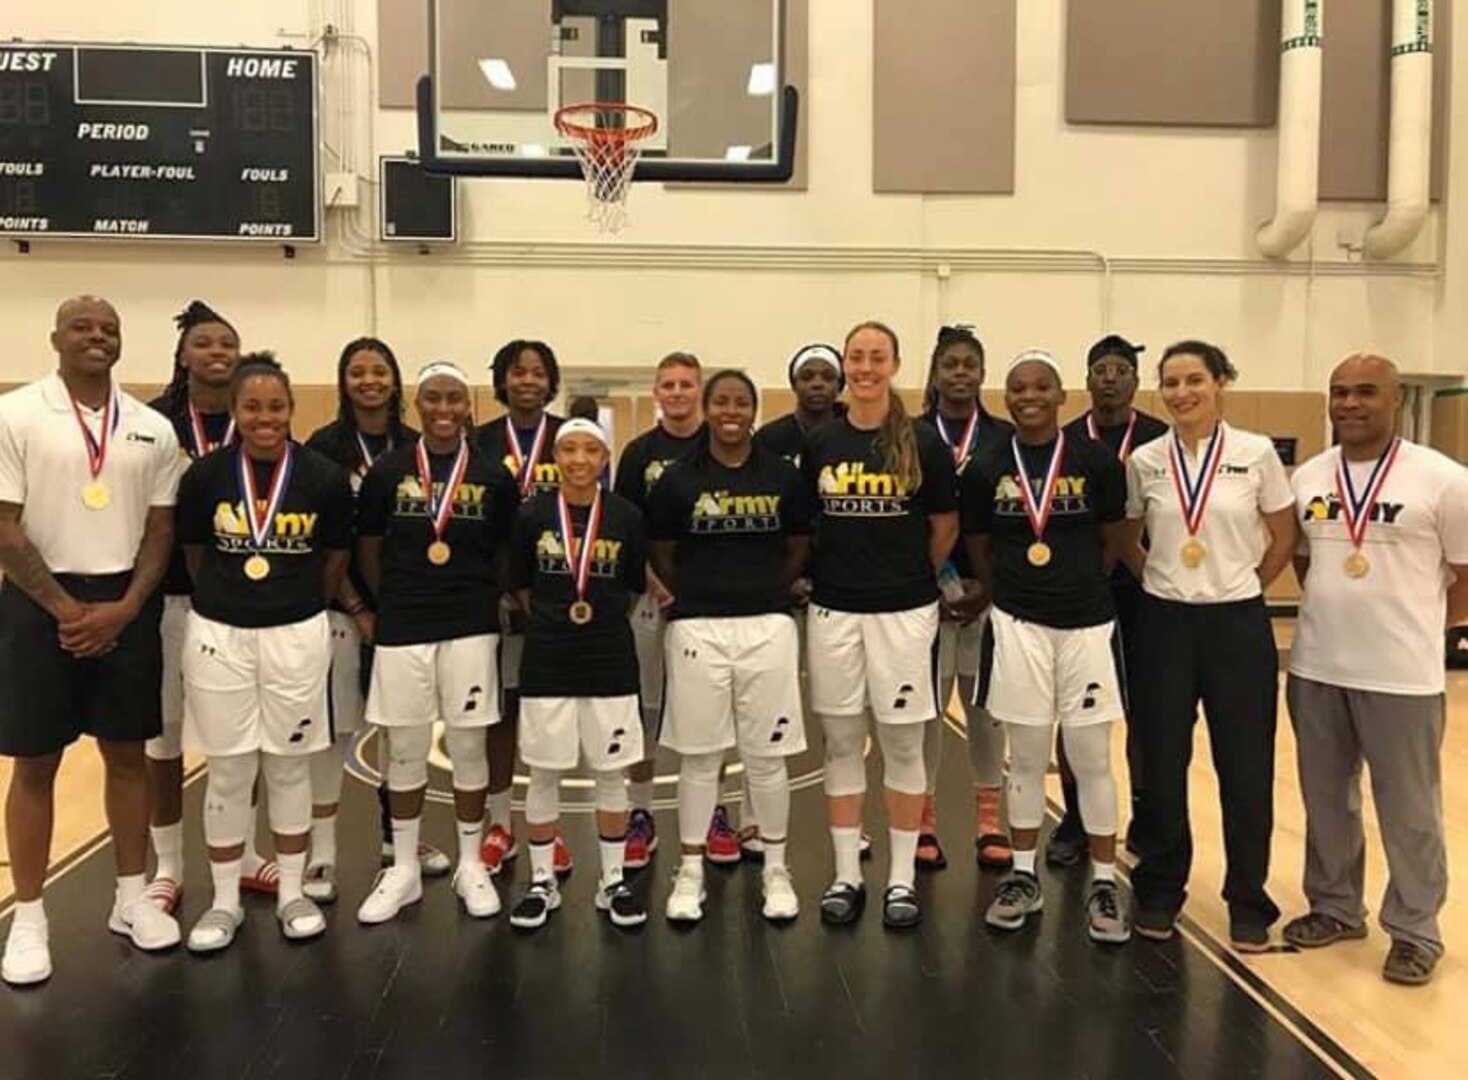 Capt. Kelsey Gebauer, (second from right, first row), stands among members of the All Army Women’s Basketball Team that won the gold medal at the U.S. Armed Forces Basketball Championships in June at Naval Station Mayport, Florida. Gebauer, Medical Education and Training Campus Physical Therapist Technician Program instructor at Joint Base San Antonio-Fort Sam Houston, worked as a physical therapist and trainer for the Army women’s team at the tournament. She has been selected as the physical therapist and trainer for the All Armed Forces Women’s Basketball Team that will compete in the International Military Sports Council 7th Military World Games in Wuhan, China, Oct. 18-28.